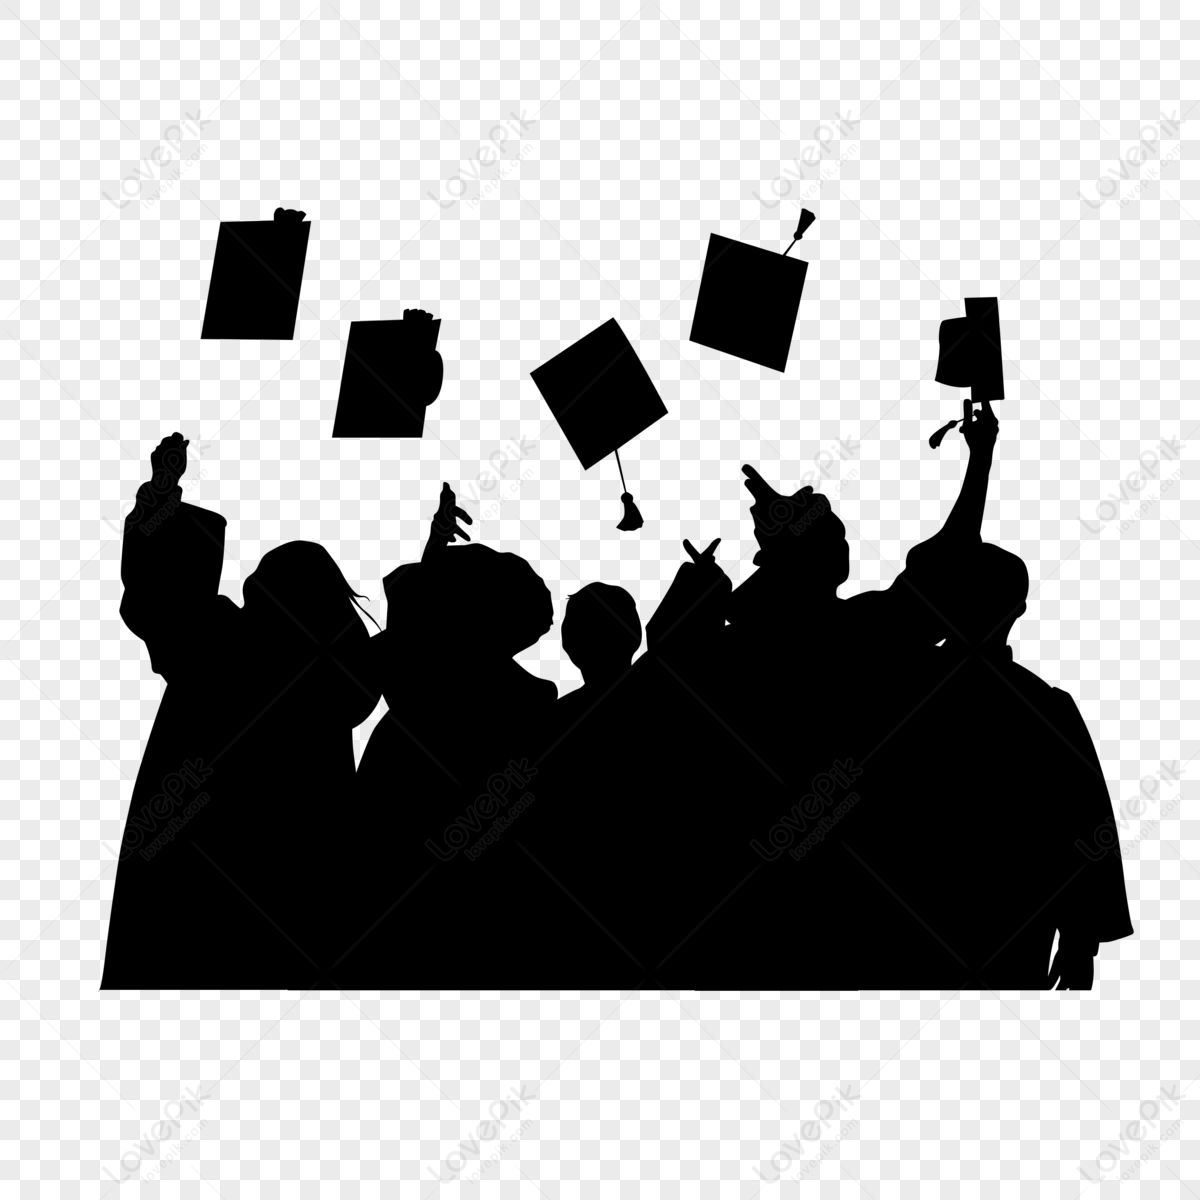 Silhouette Of Graduation Cap,student,hat,characters Free PNG And ...